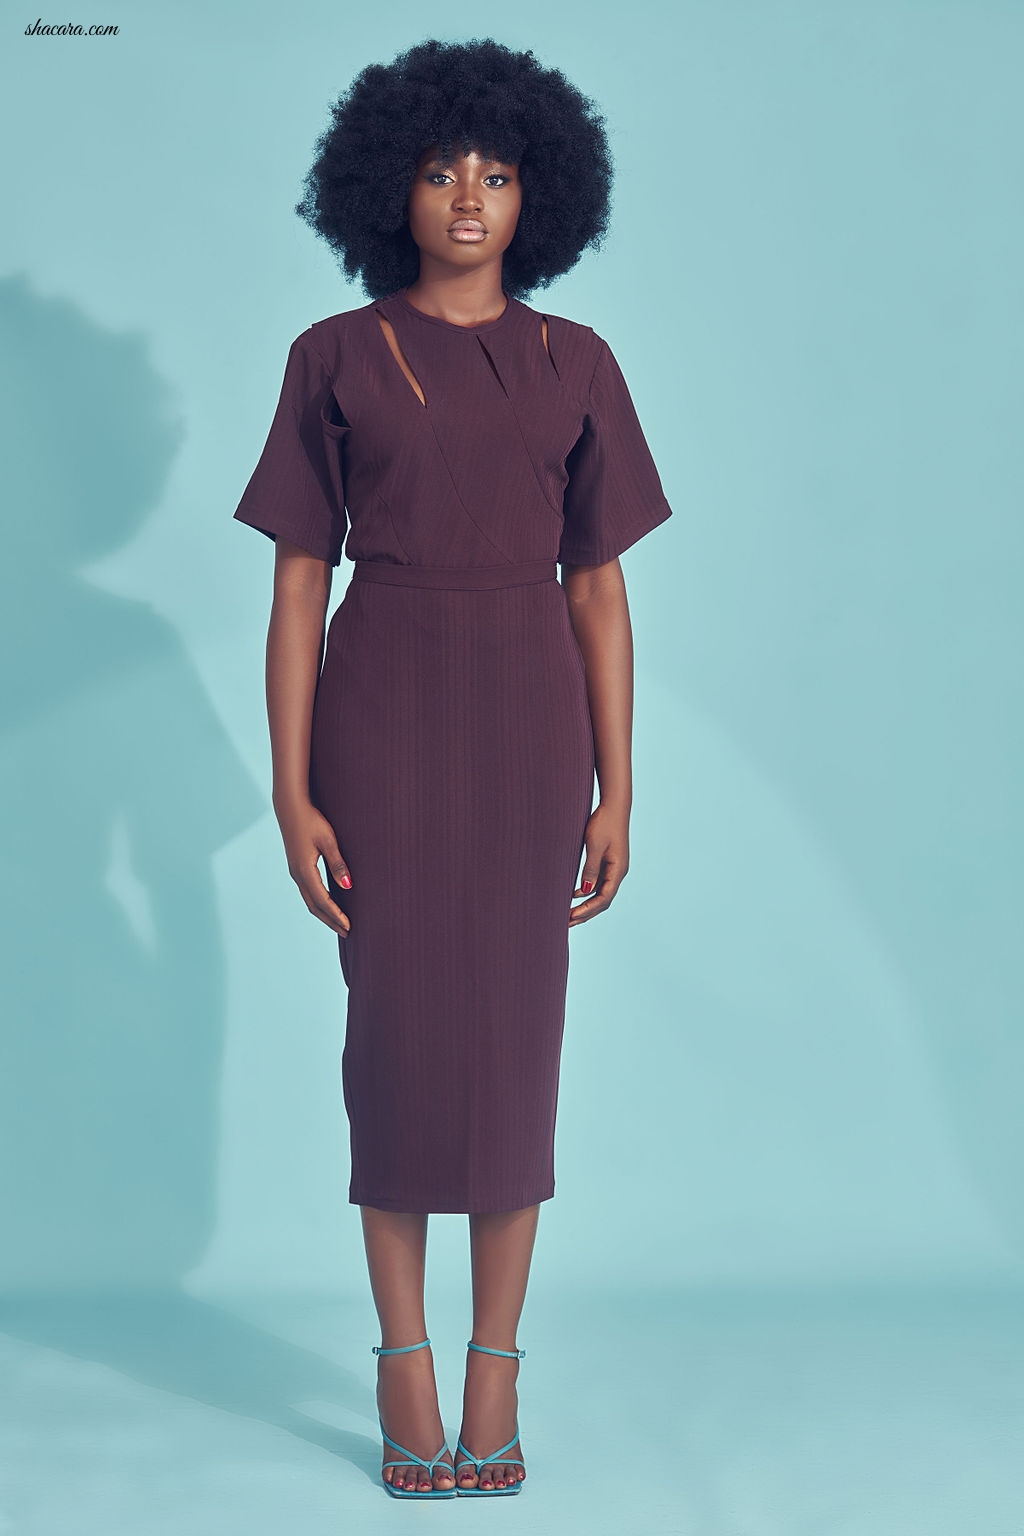 Here’s Every Piece From TIFÉ’s New Holiday Collection Starring Kaylah Oniwo